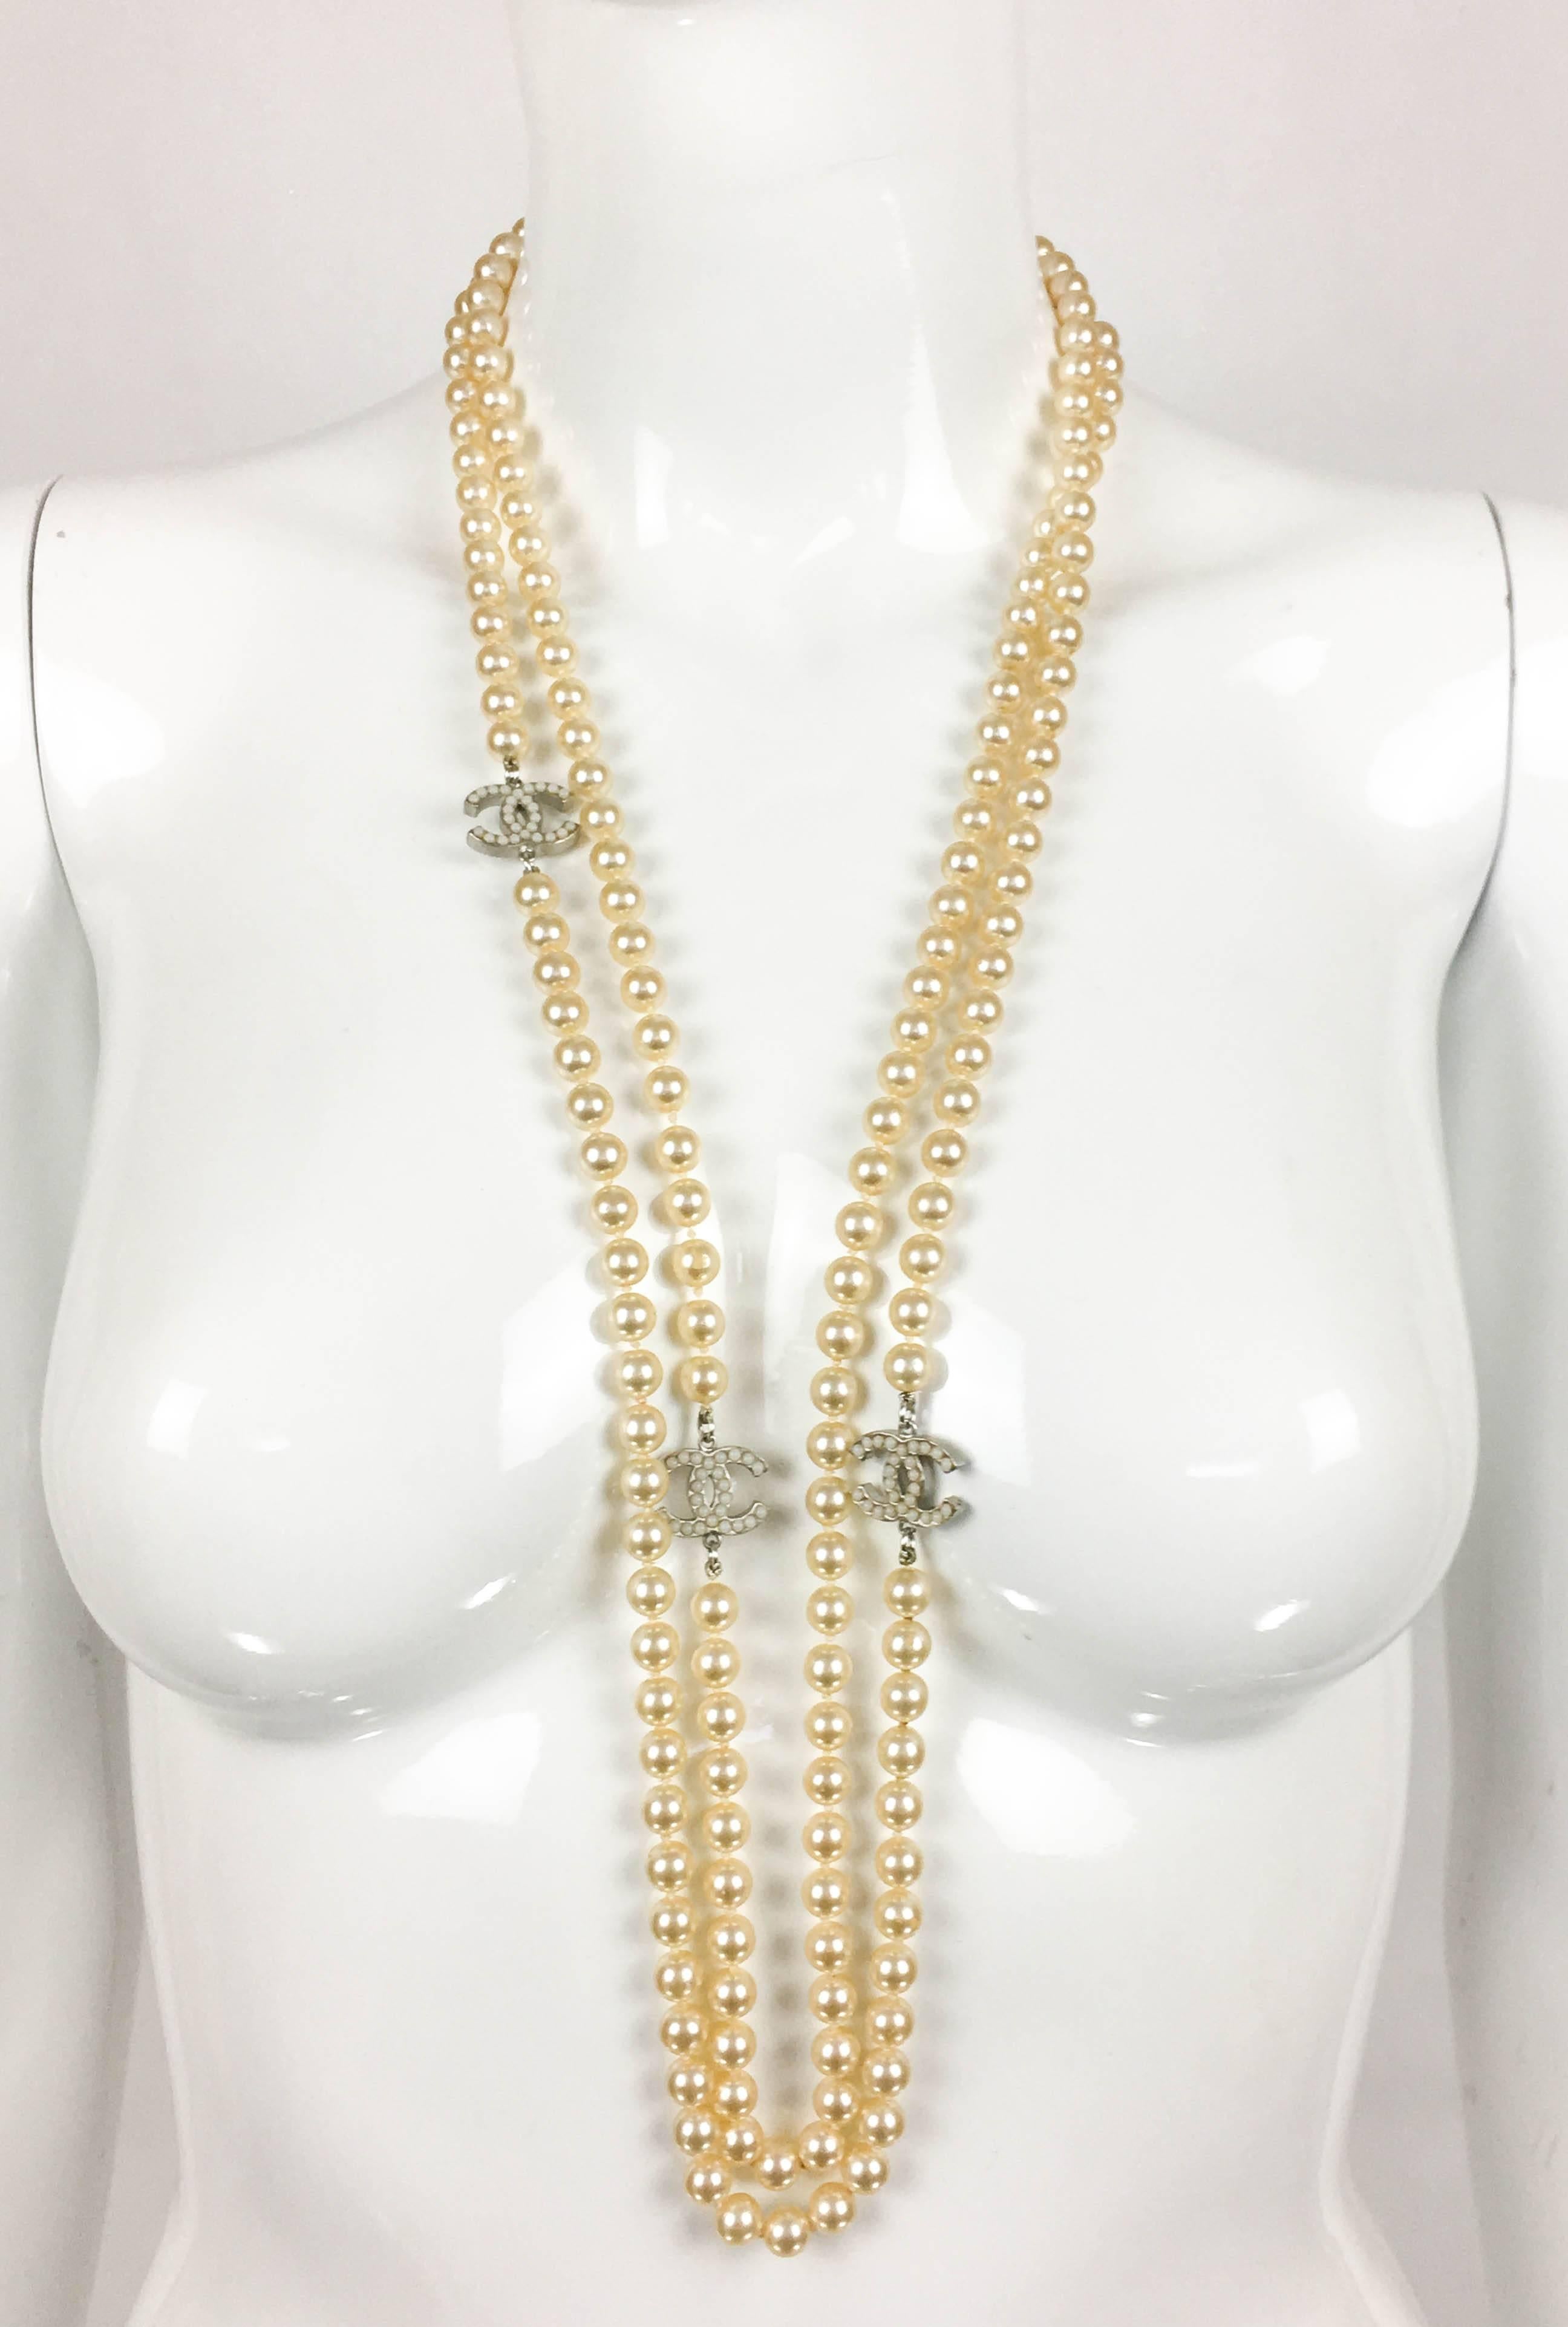 2008 Chanel Long Pearl Sautoir Necklace with 3 Inset Pearl 'CC' Logos In Excellent Condition In London, Chelsea